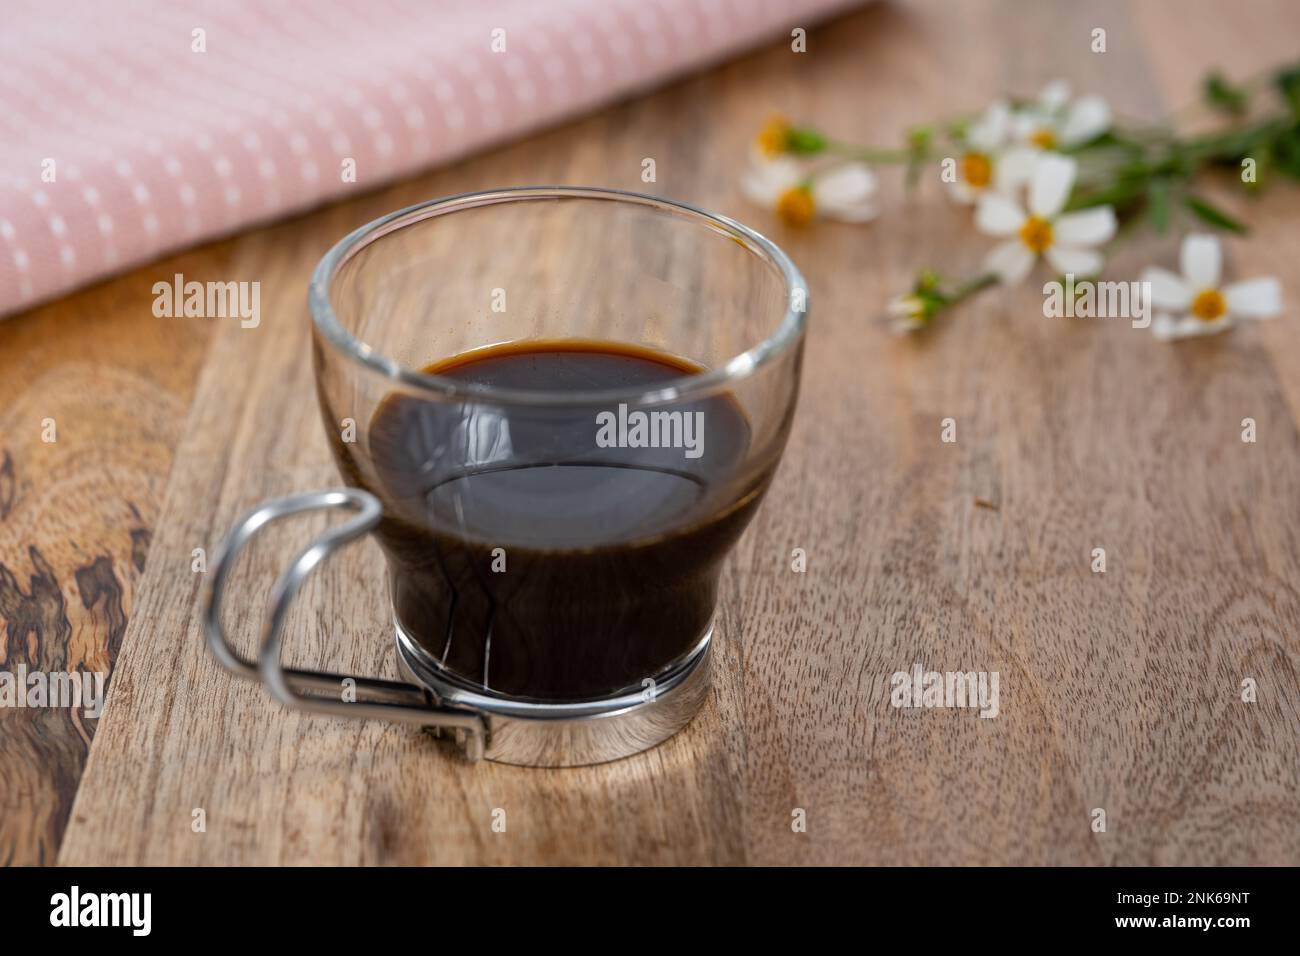 Single espresso in a glass on a wooden table with wildflowers Stock Photo